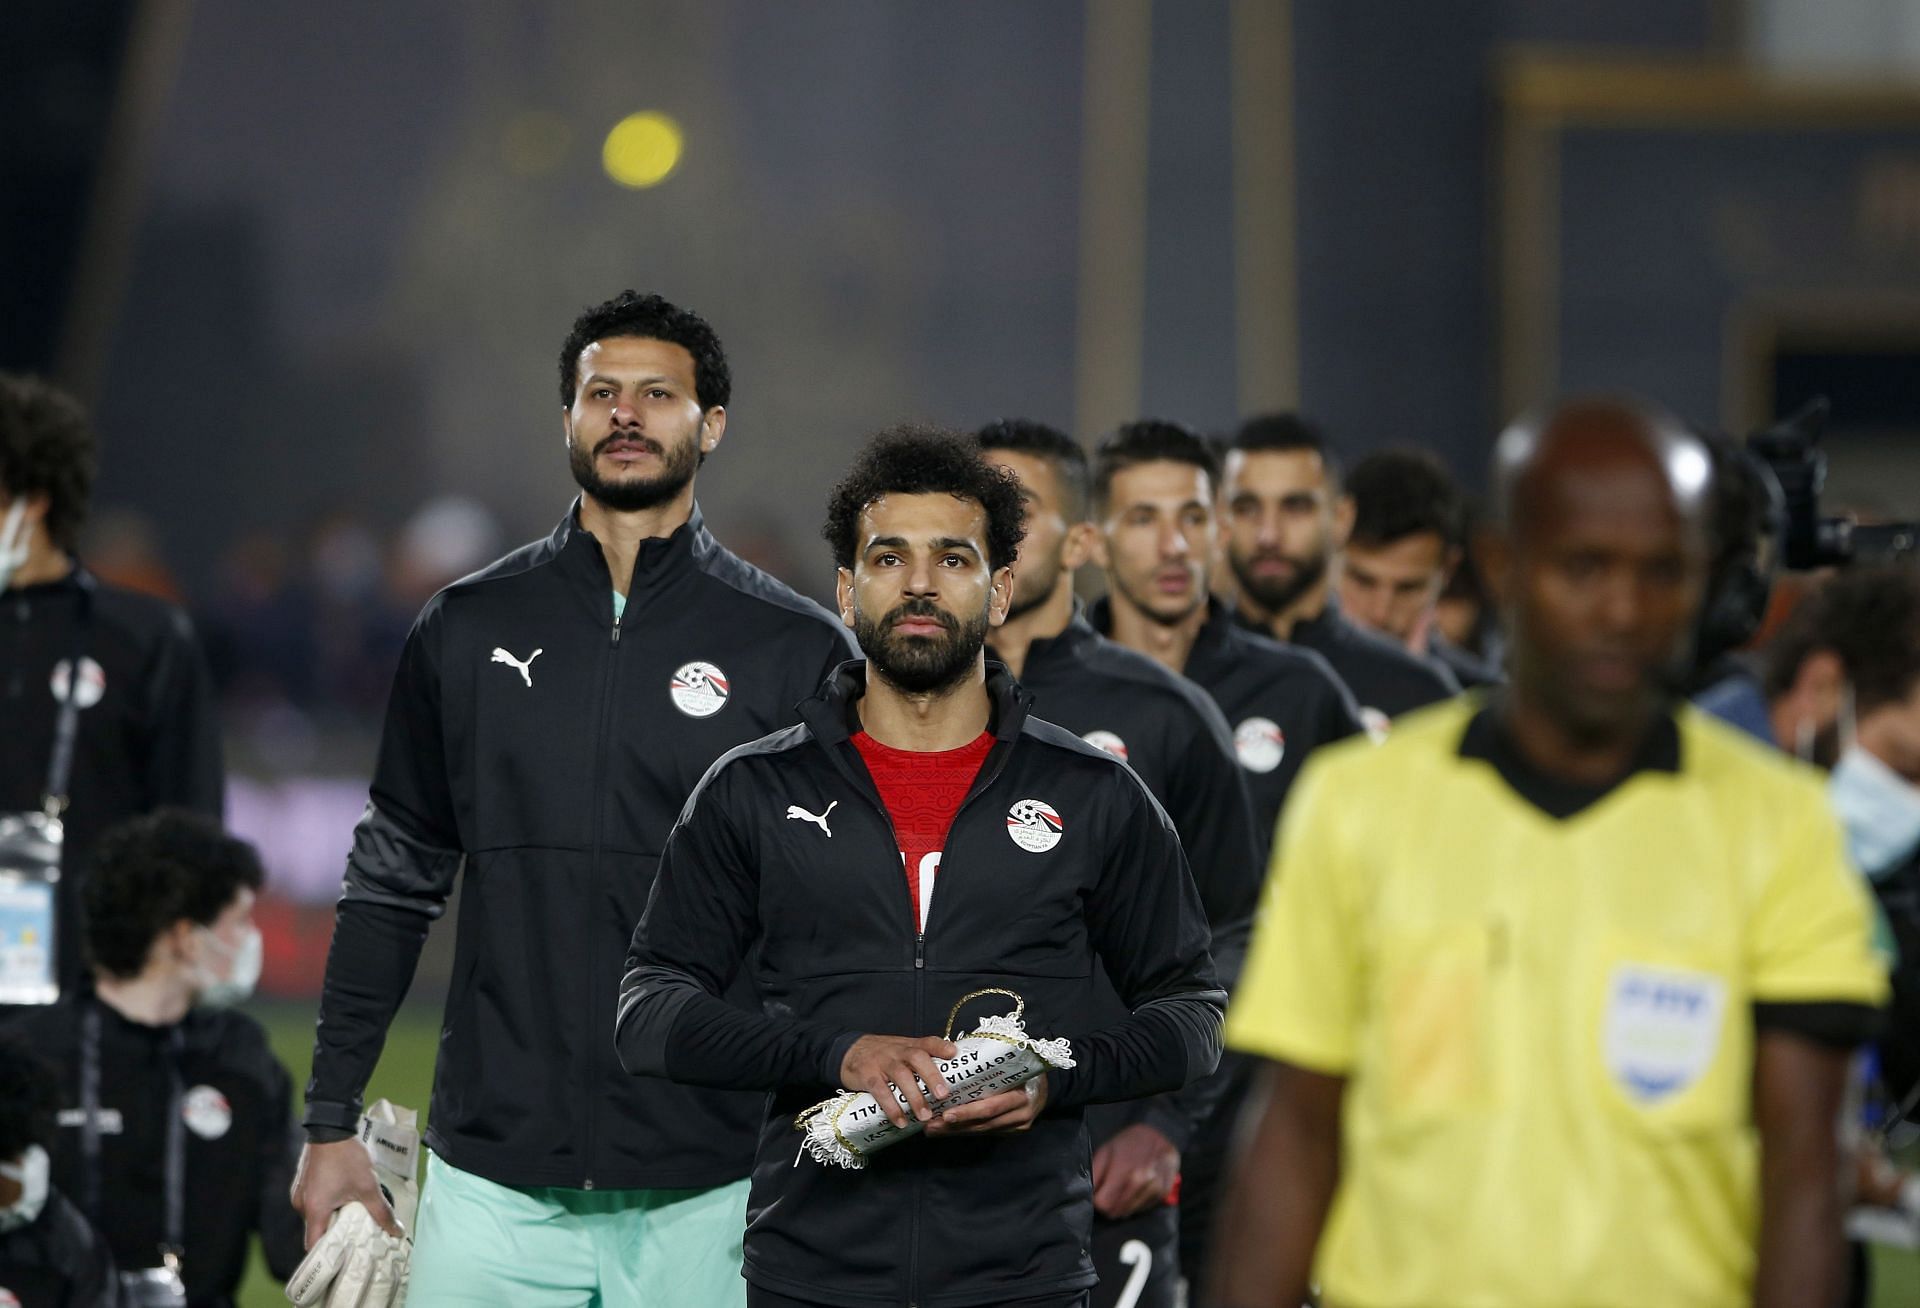 Egypt will not be going to the World Cup in Qatar